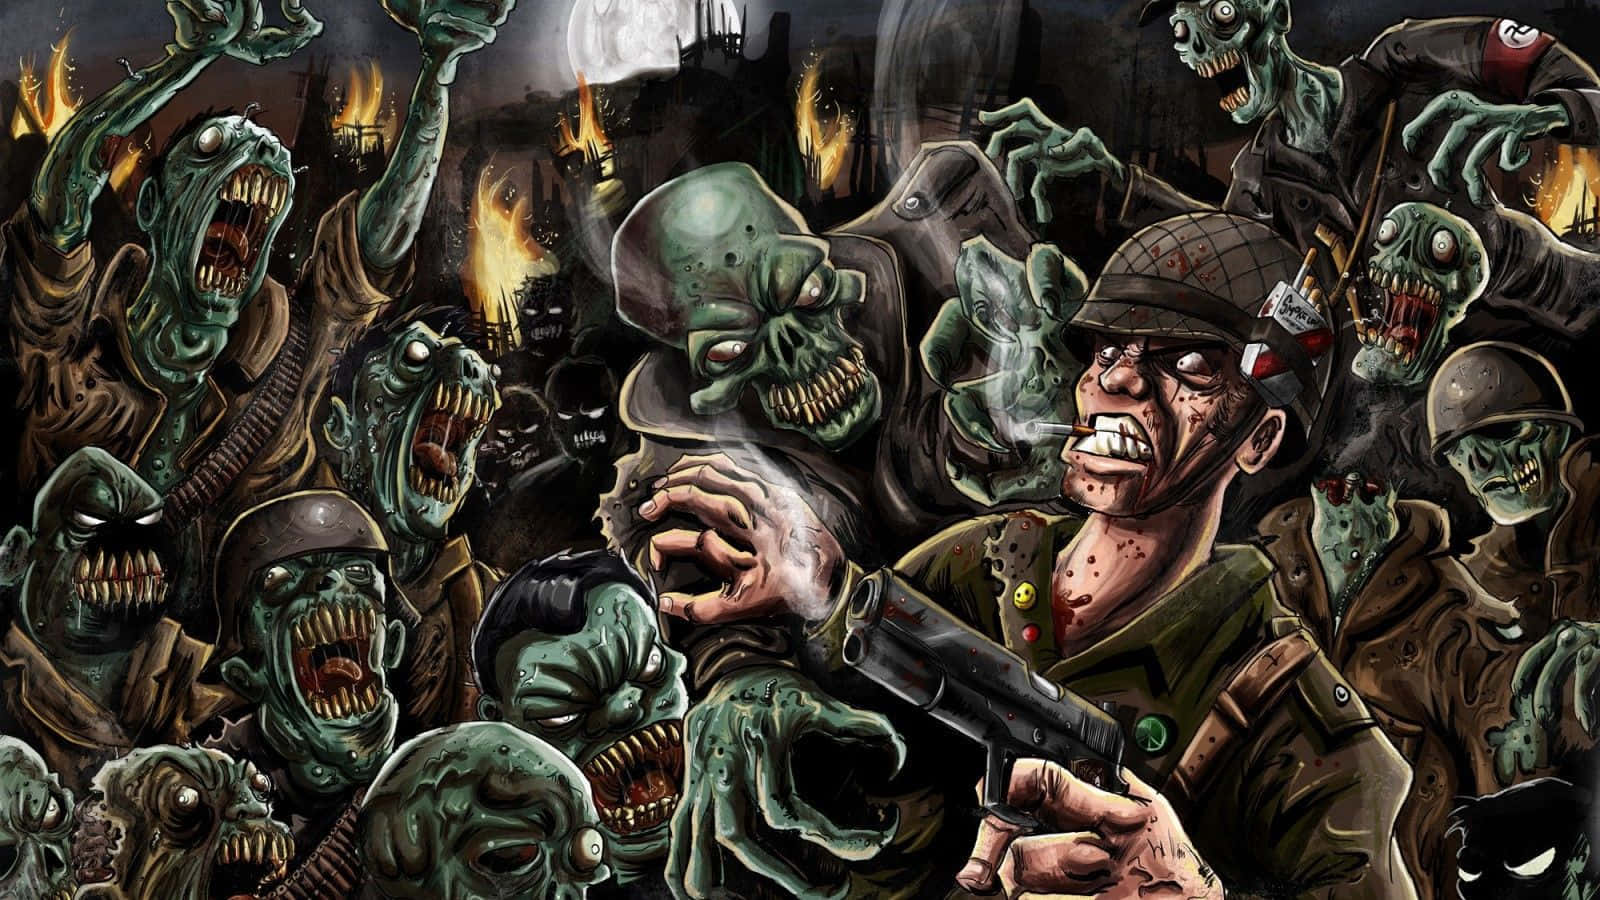 Stay alive in the #1 zombie shooter game - Call of Duty: Zombies Wallpaper